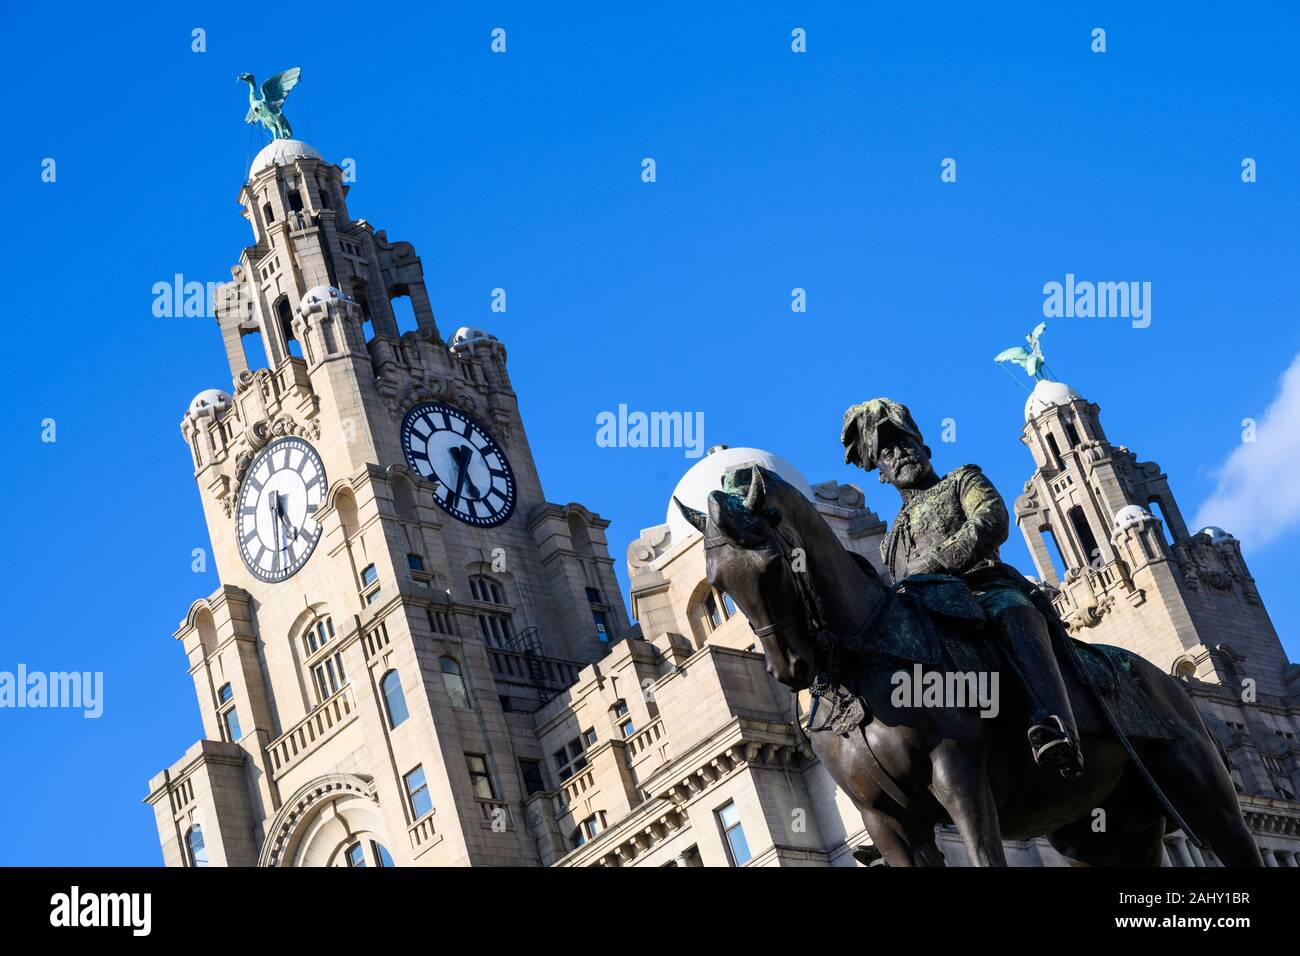 Equestrian statue (1921) of King Edward VII and the Royal Liver Building (1911), a Grade I listed building on Pier Head, Liverpool, England, UK Stock Photo